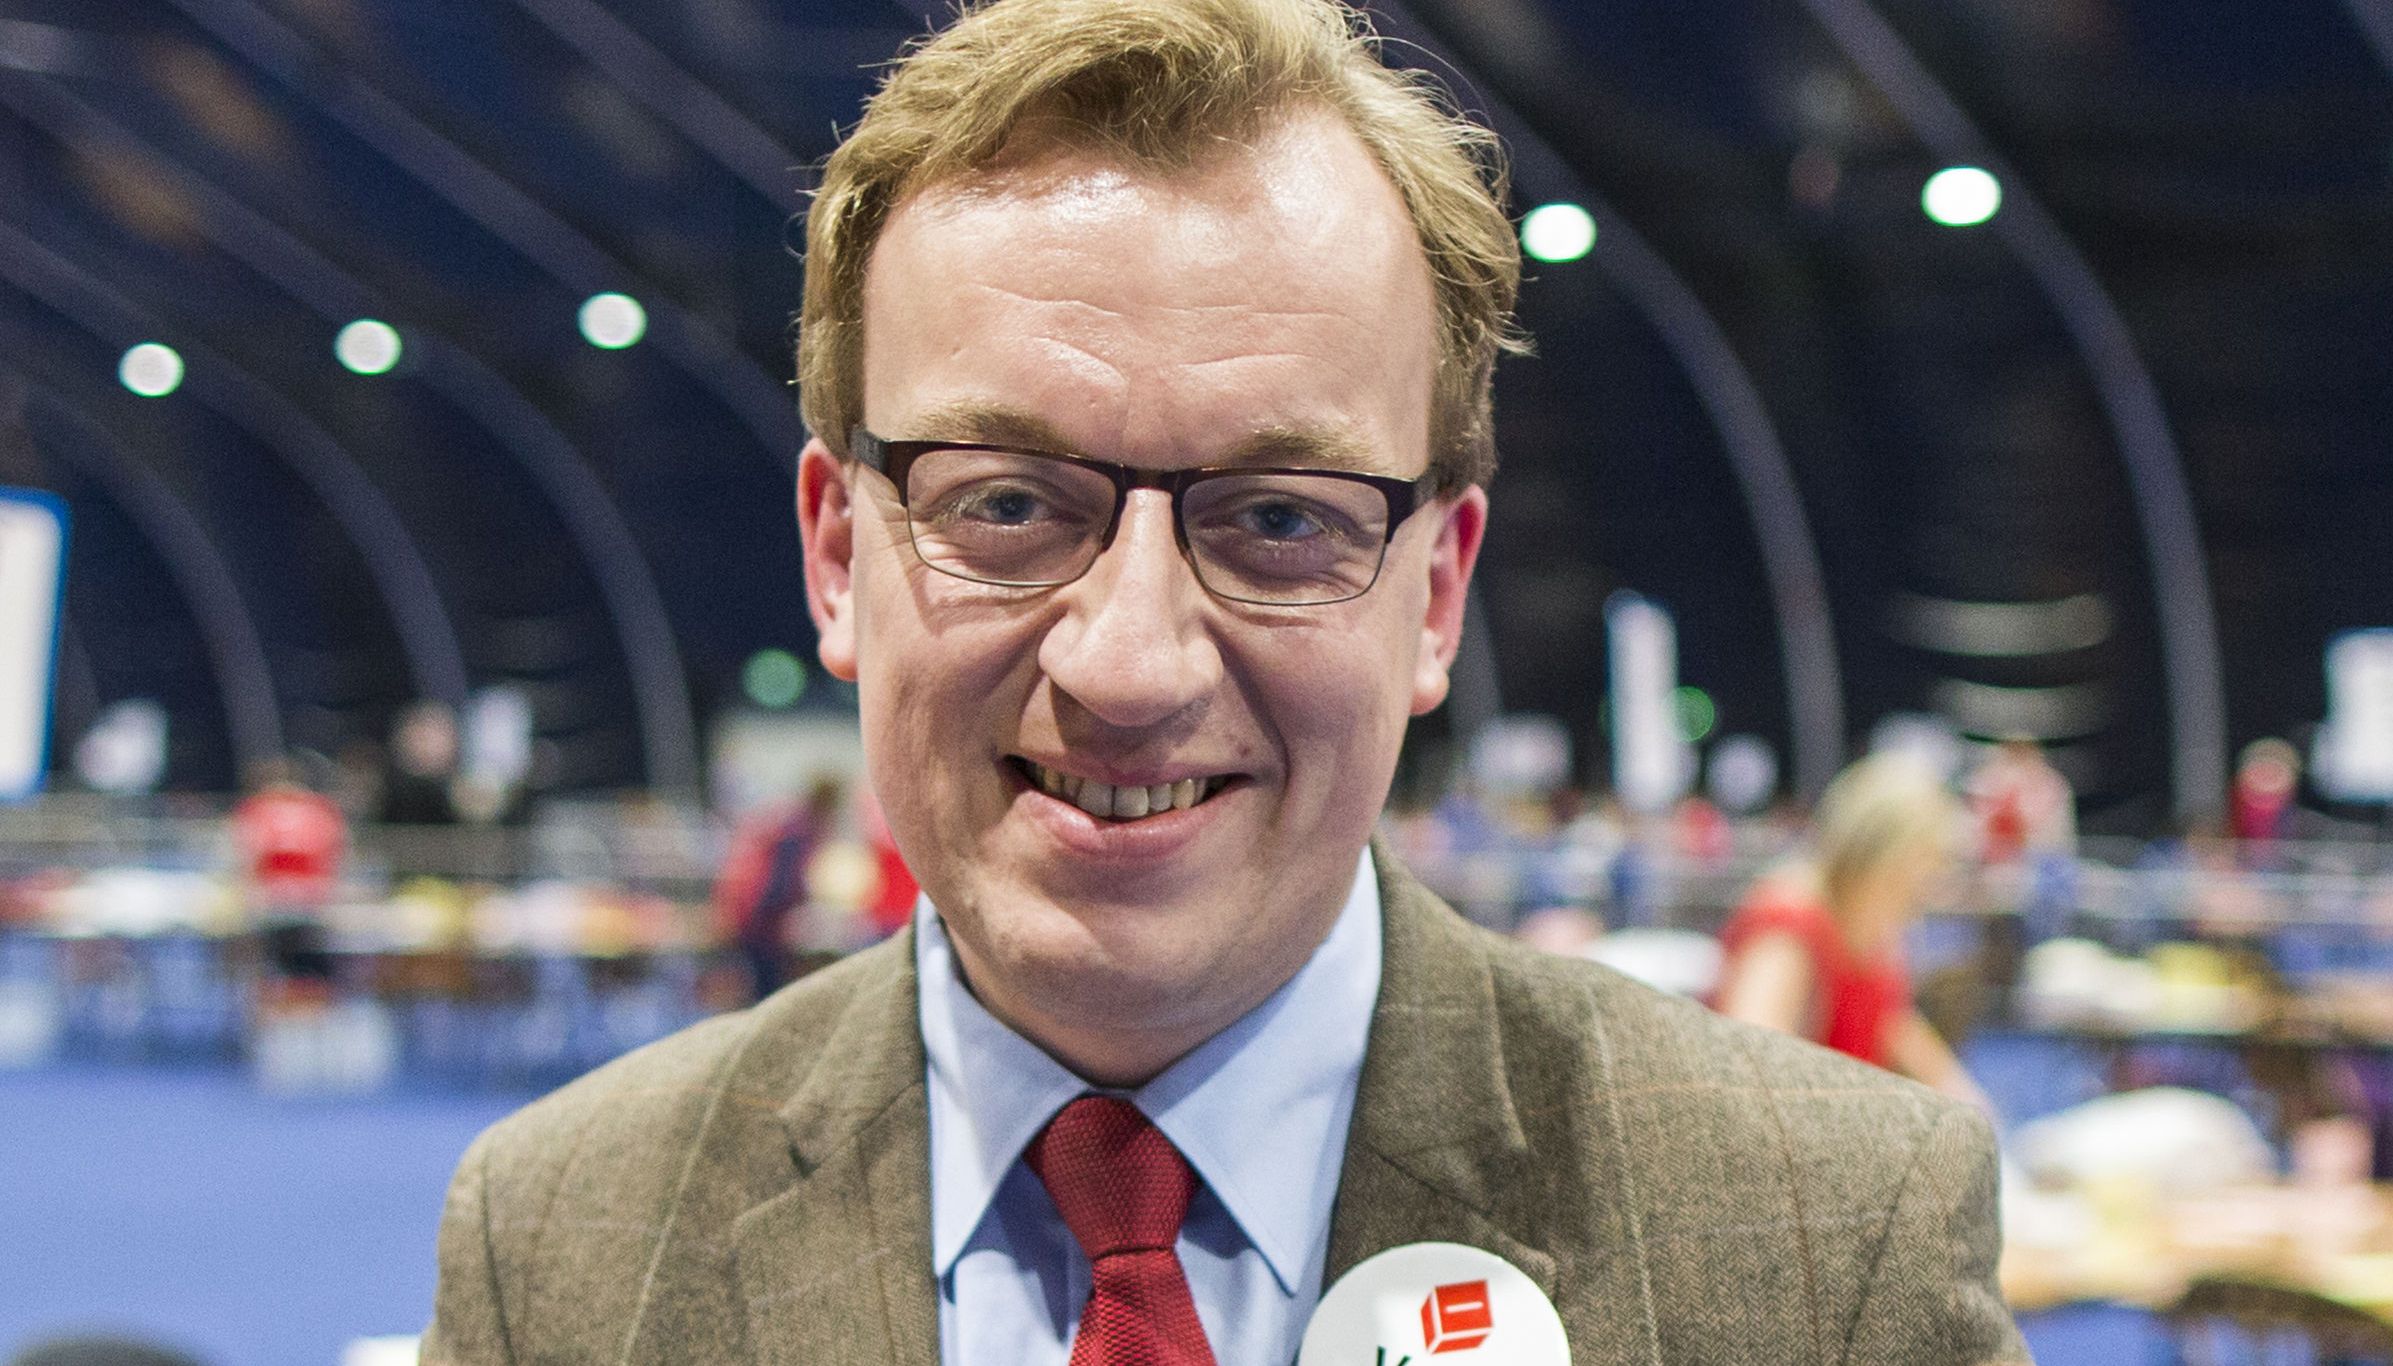 Christopher Stalford, at the Titanic Exhibition Centre, Belfast, for the counting of votes cast in the EU referendum in 2016.